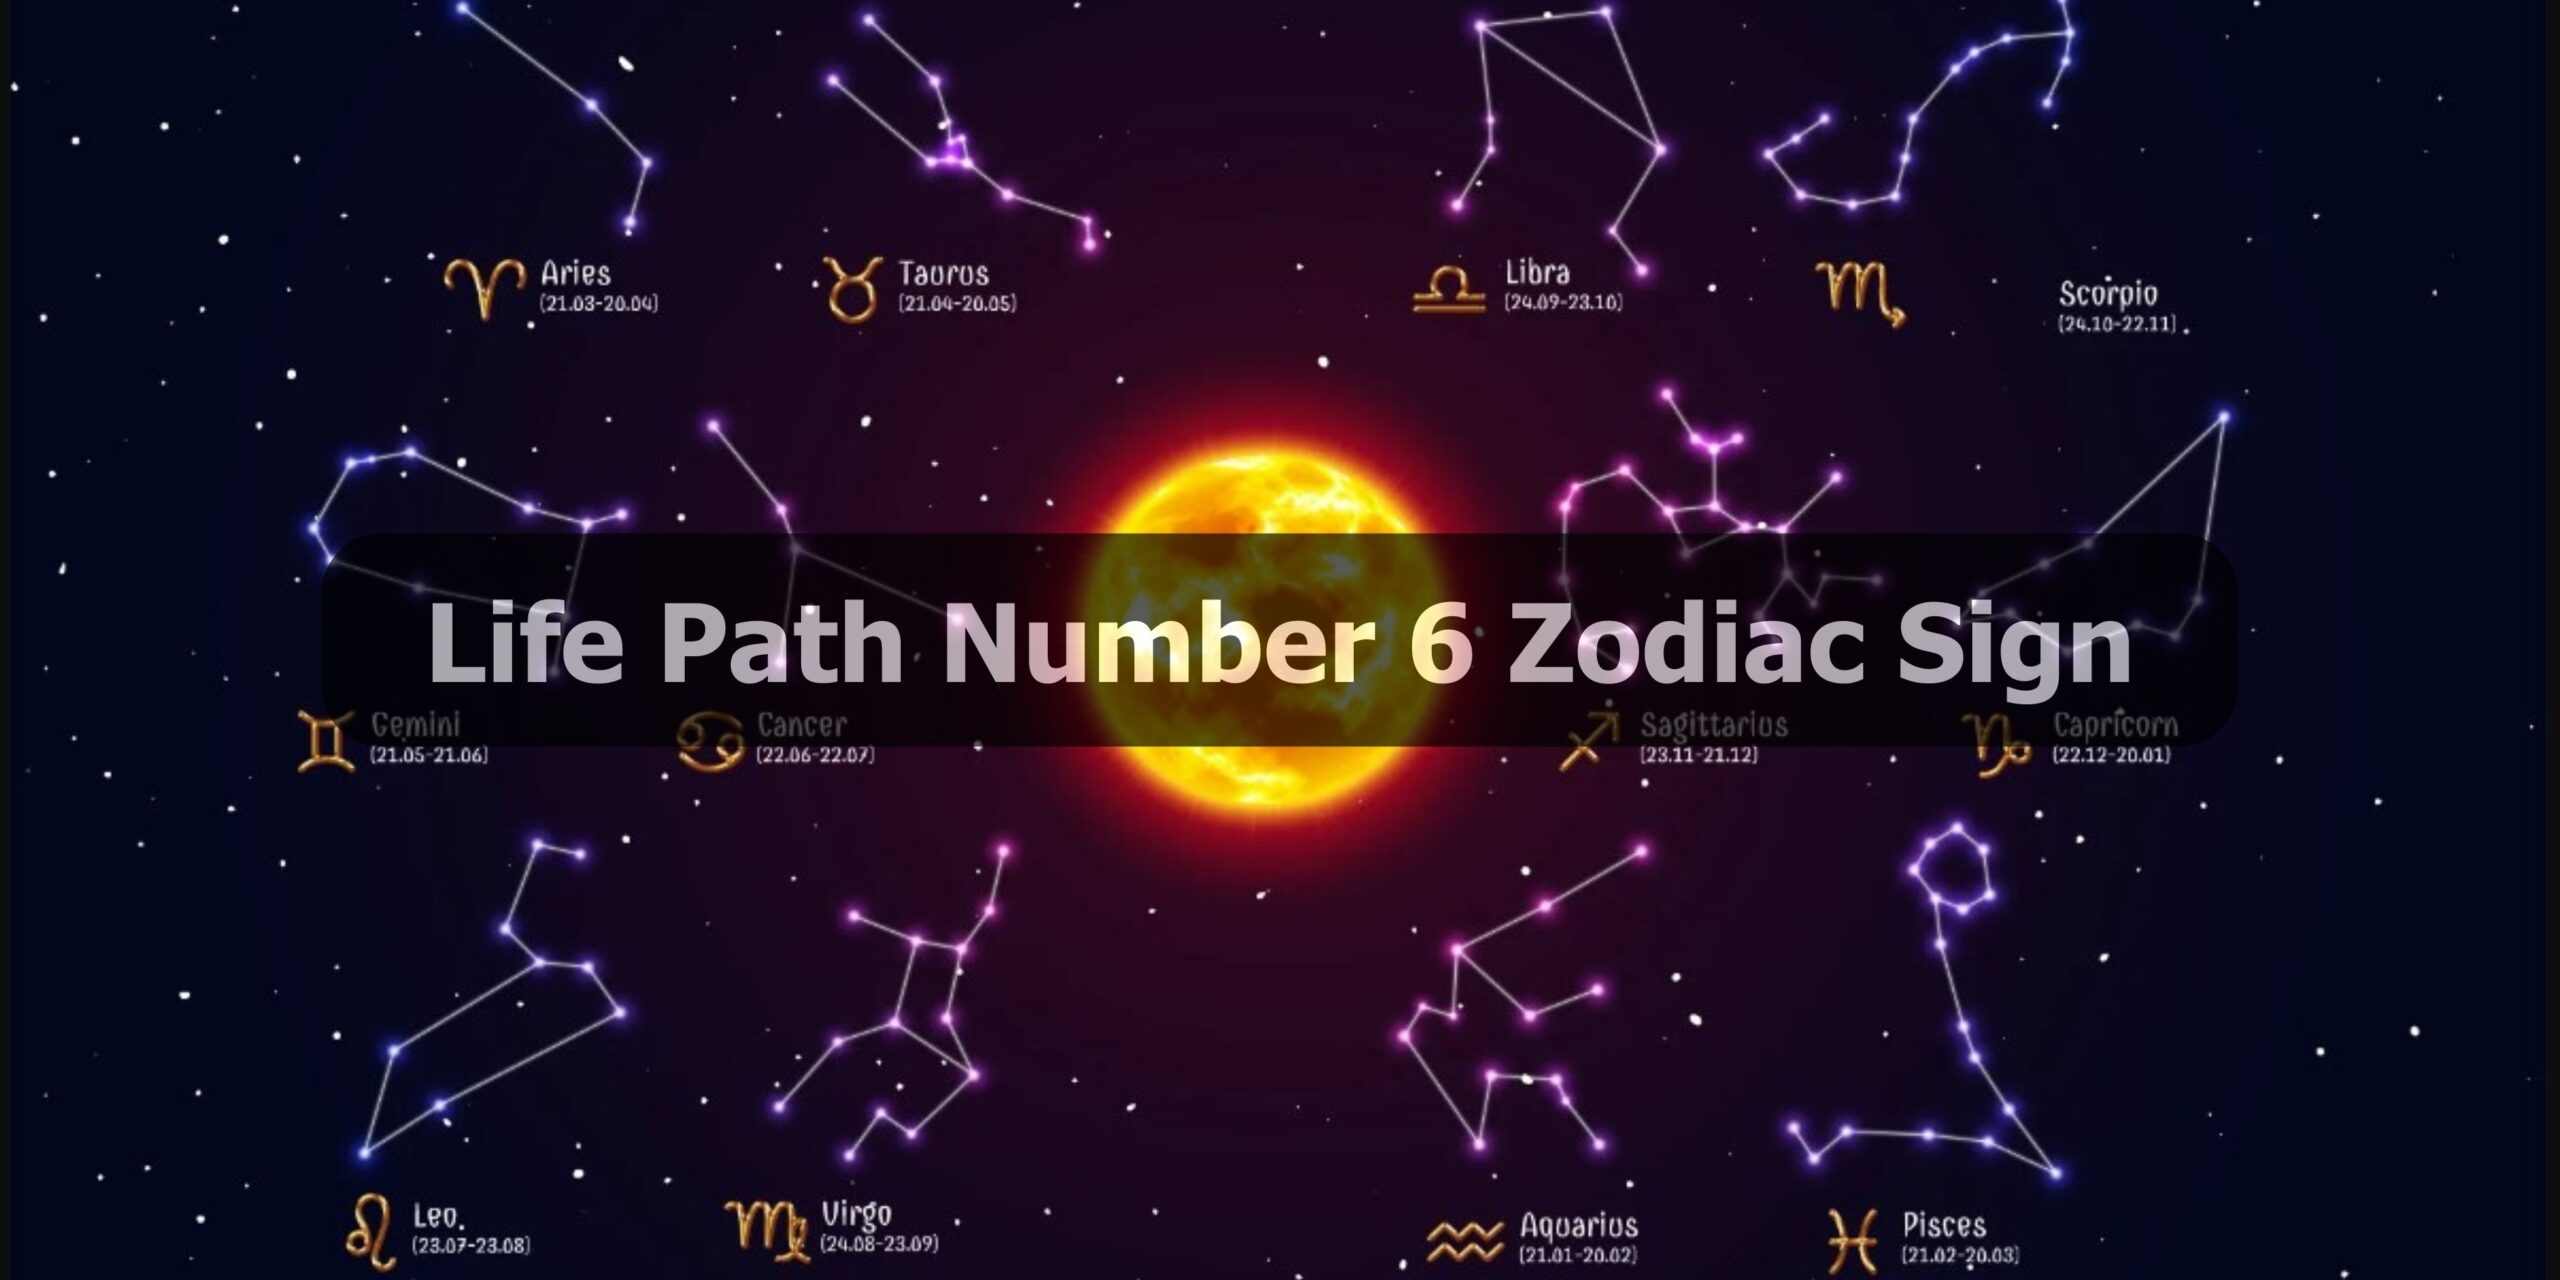 Life Path Number 6 Zodiac Sign